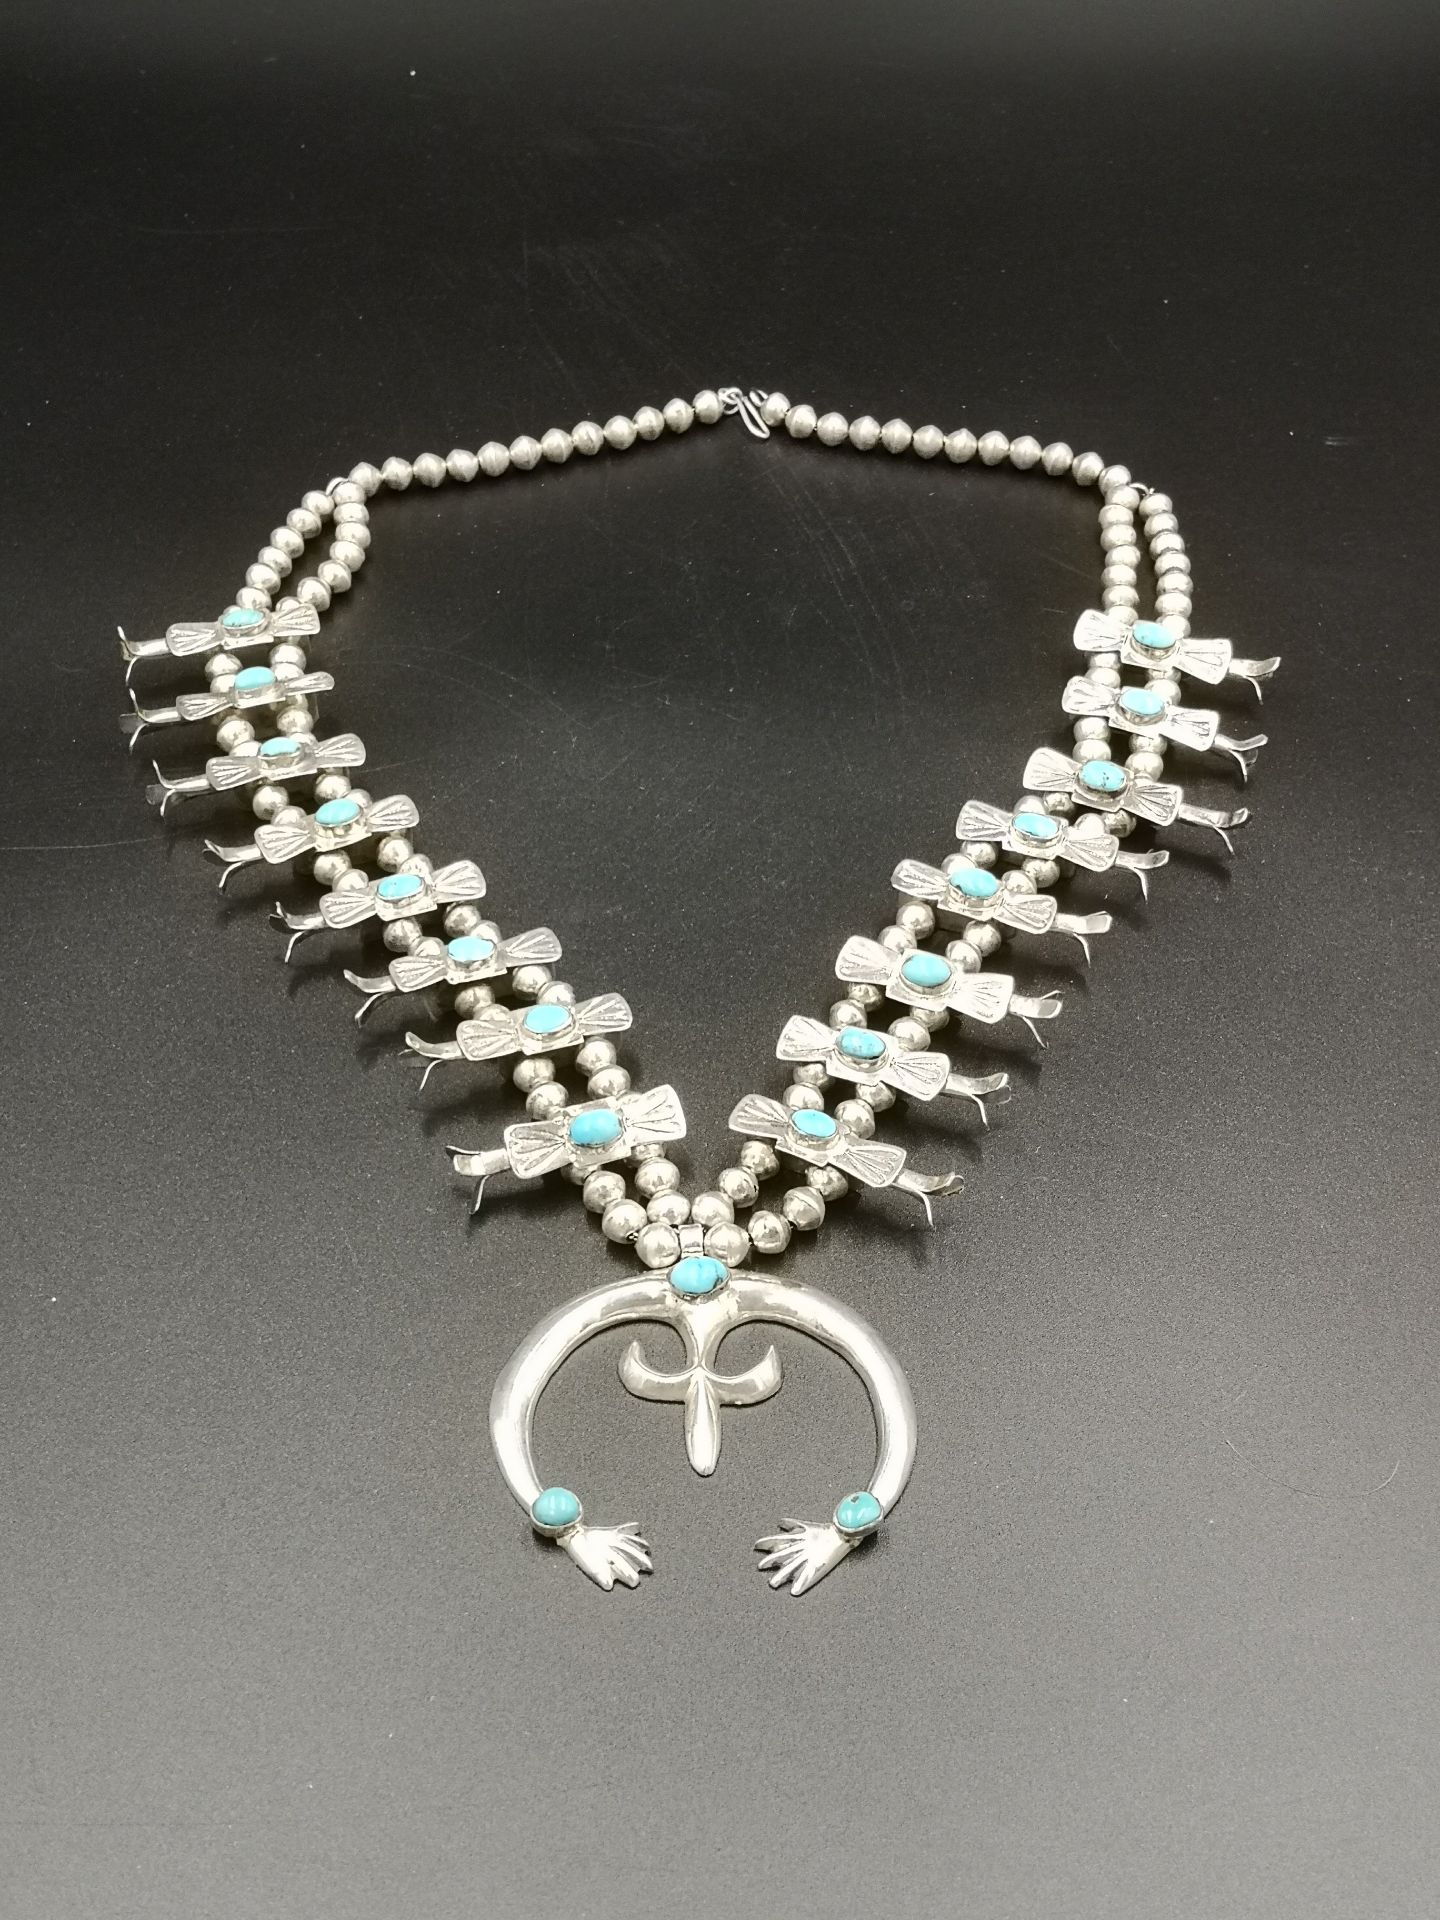 Fred Harvey silver and turquoise 'squash blossom' necklace - Image 5 of 6